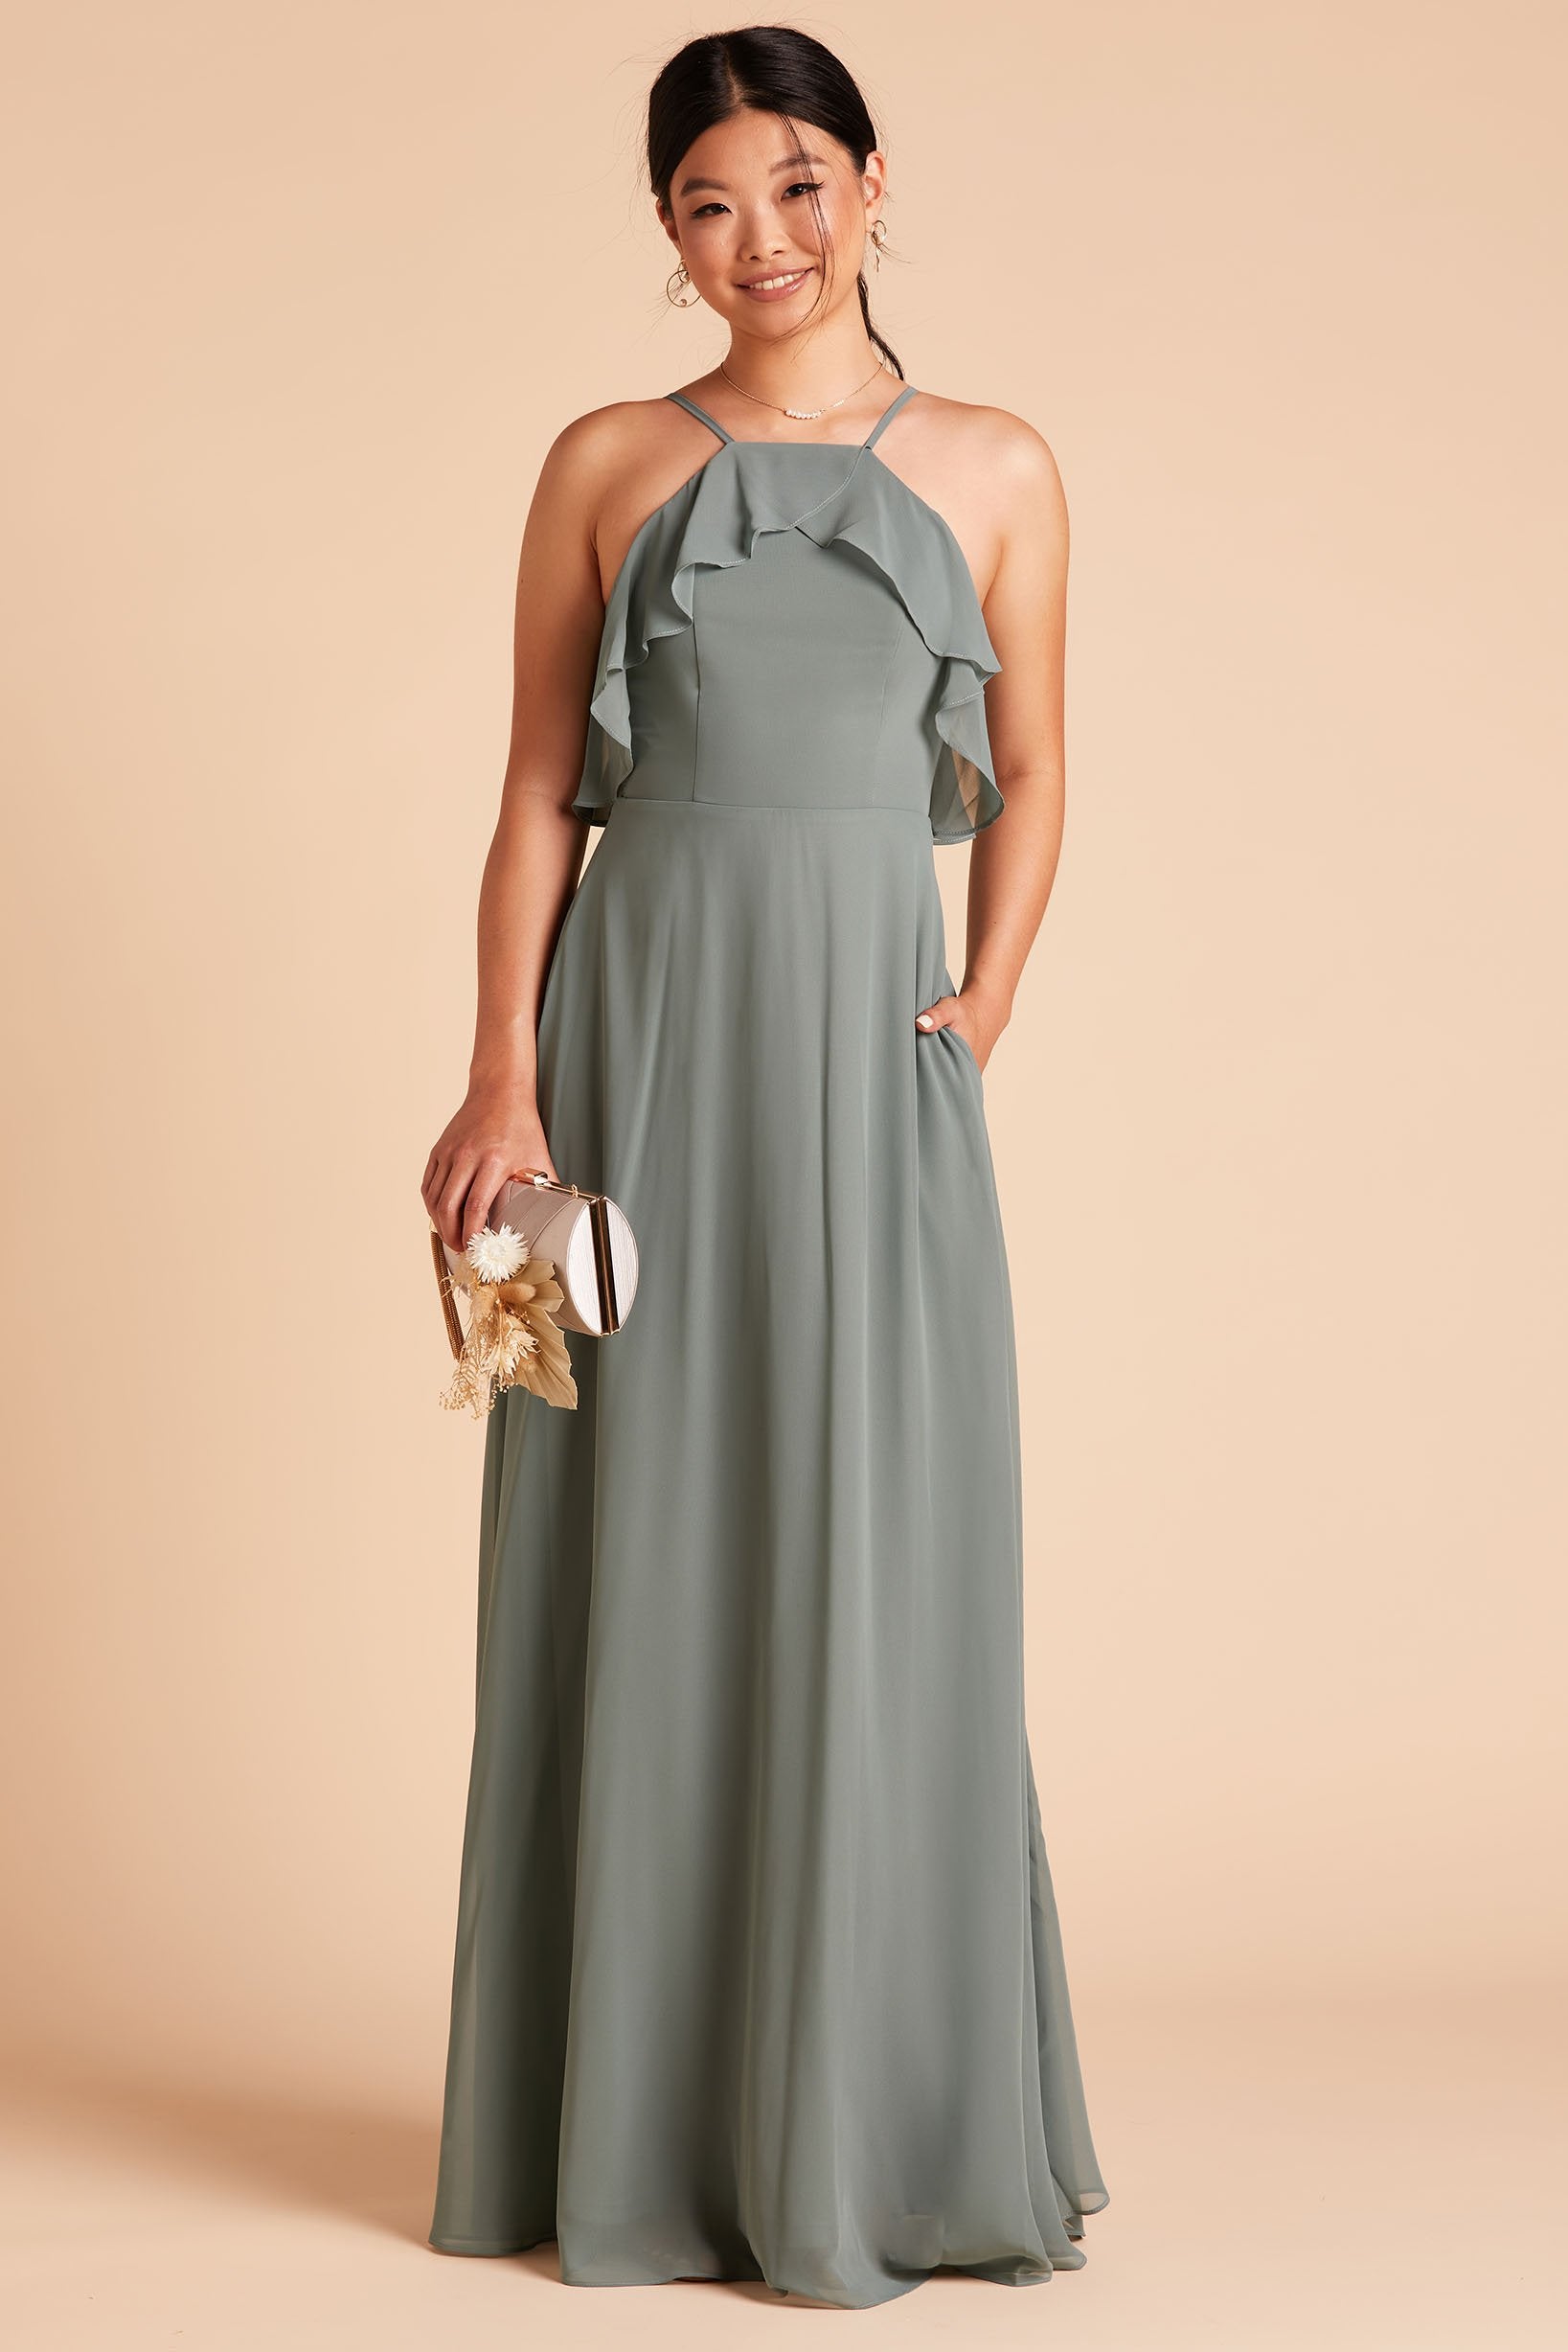 Jules bridesmaid dress in sea glass green chiffon by Birdy Grey, front view with hand in pocket